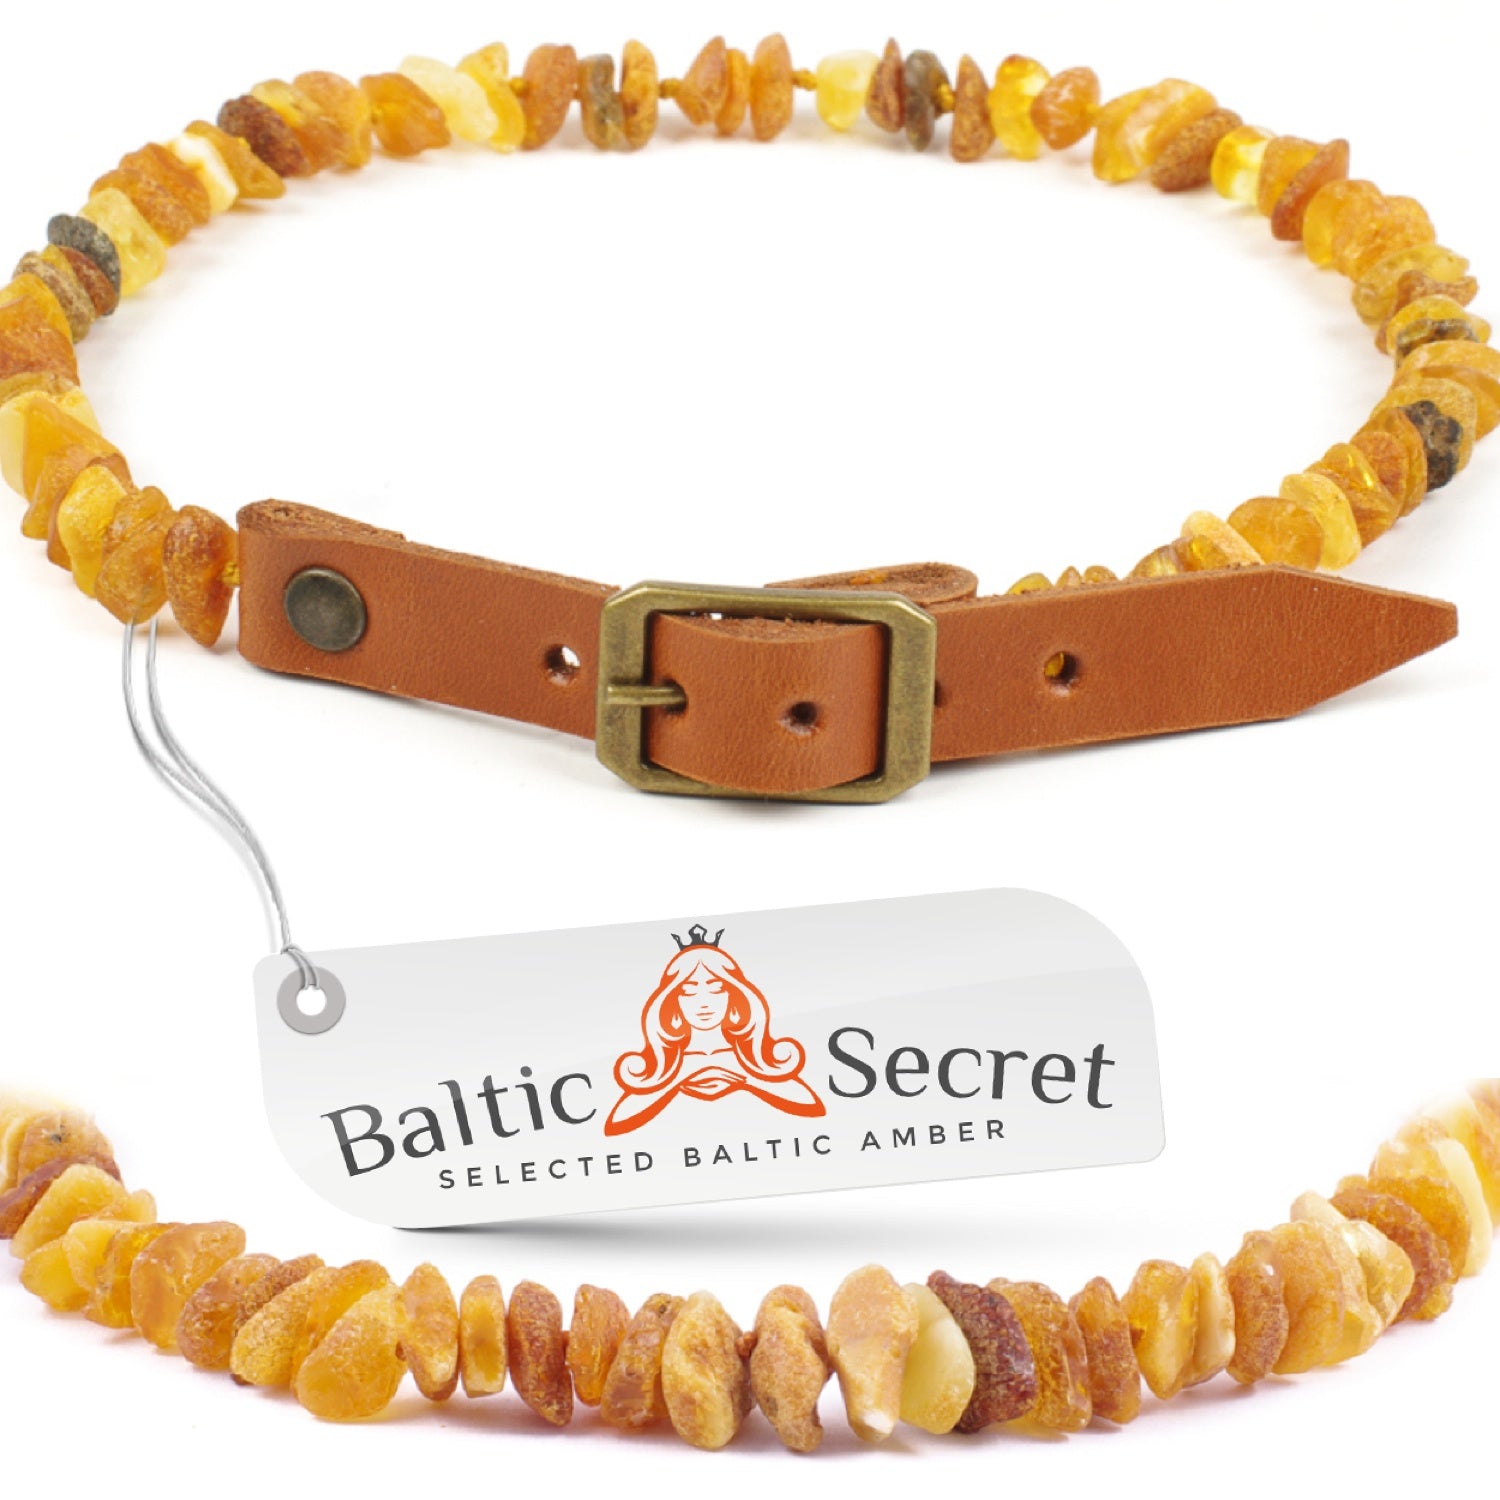 Amber Collars for Dogs & Cats with Adjustable Orange Leather Belt